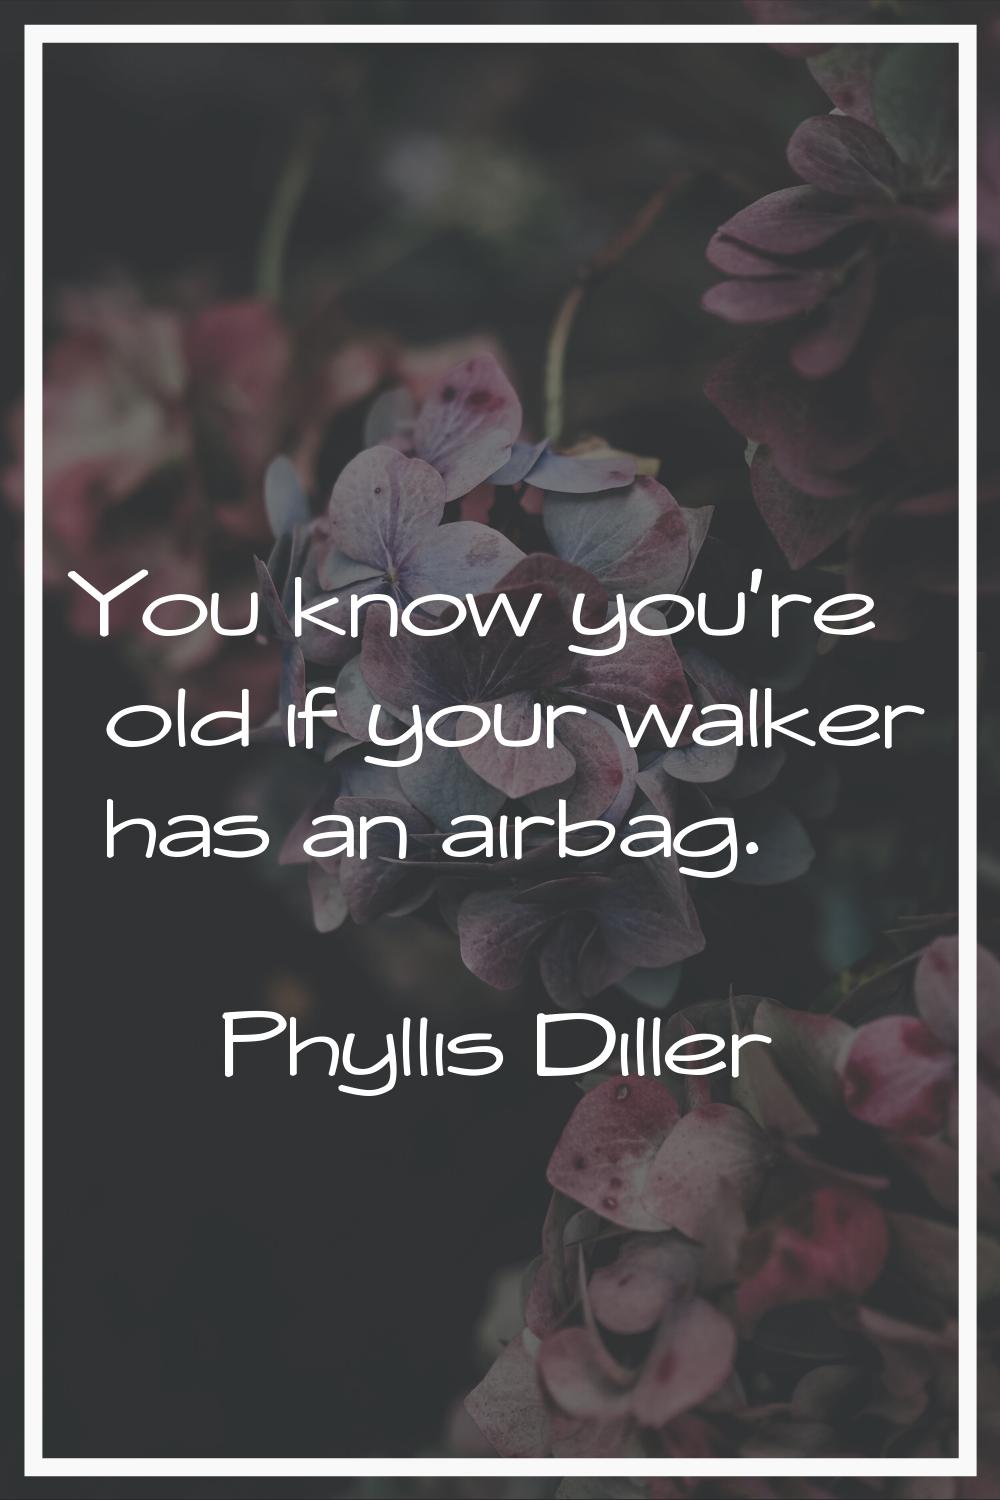 You know you're old if your walker has an airbag.